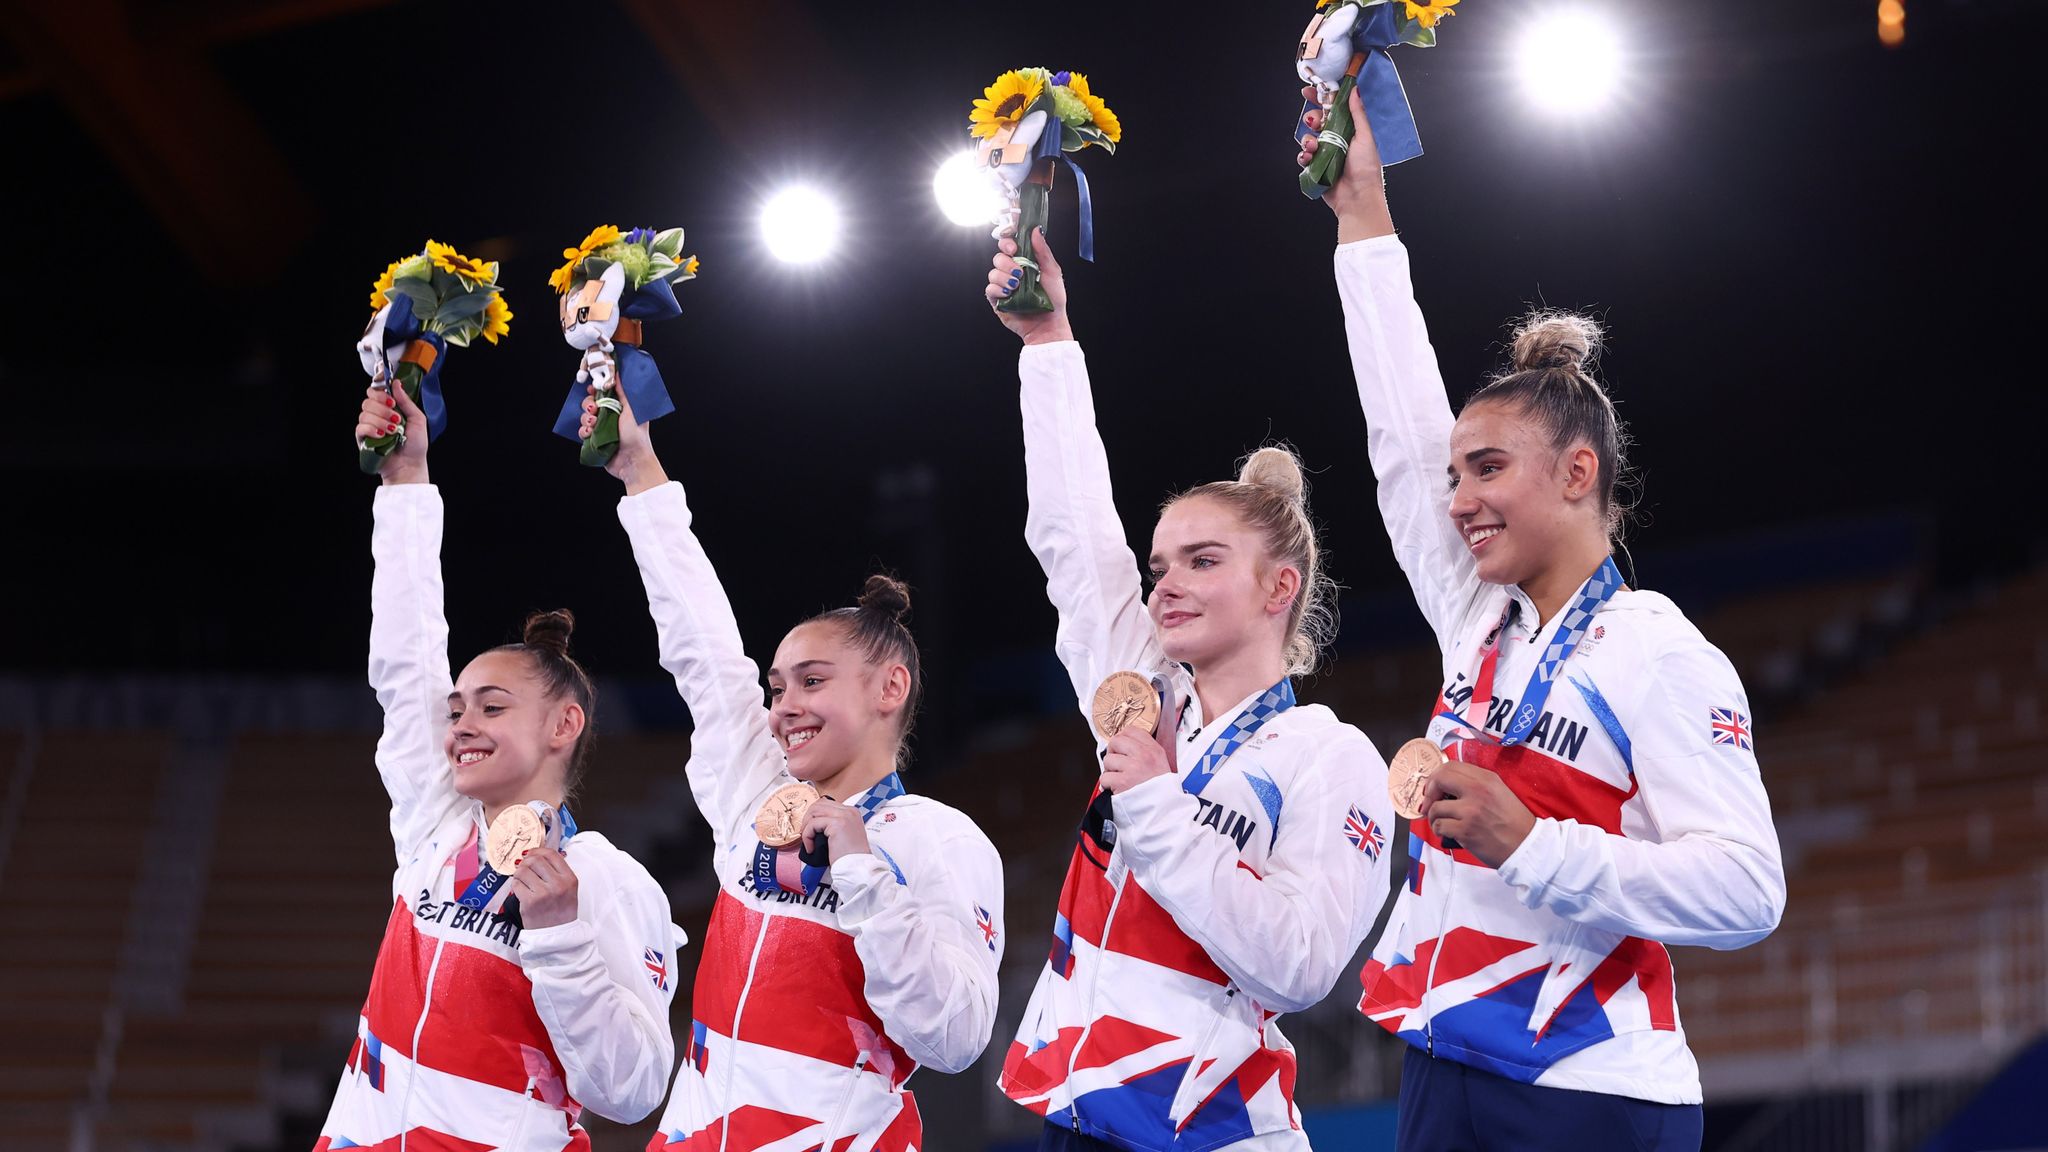 Tokyo Olympics Team Gb Win Bronze In Women S Team Gymnastics For First Time Since 1928 World News Sky News